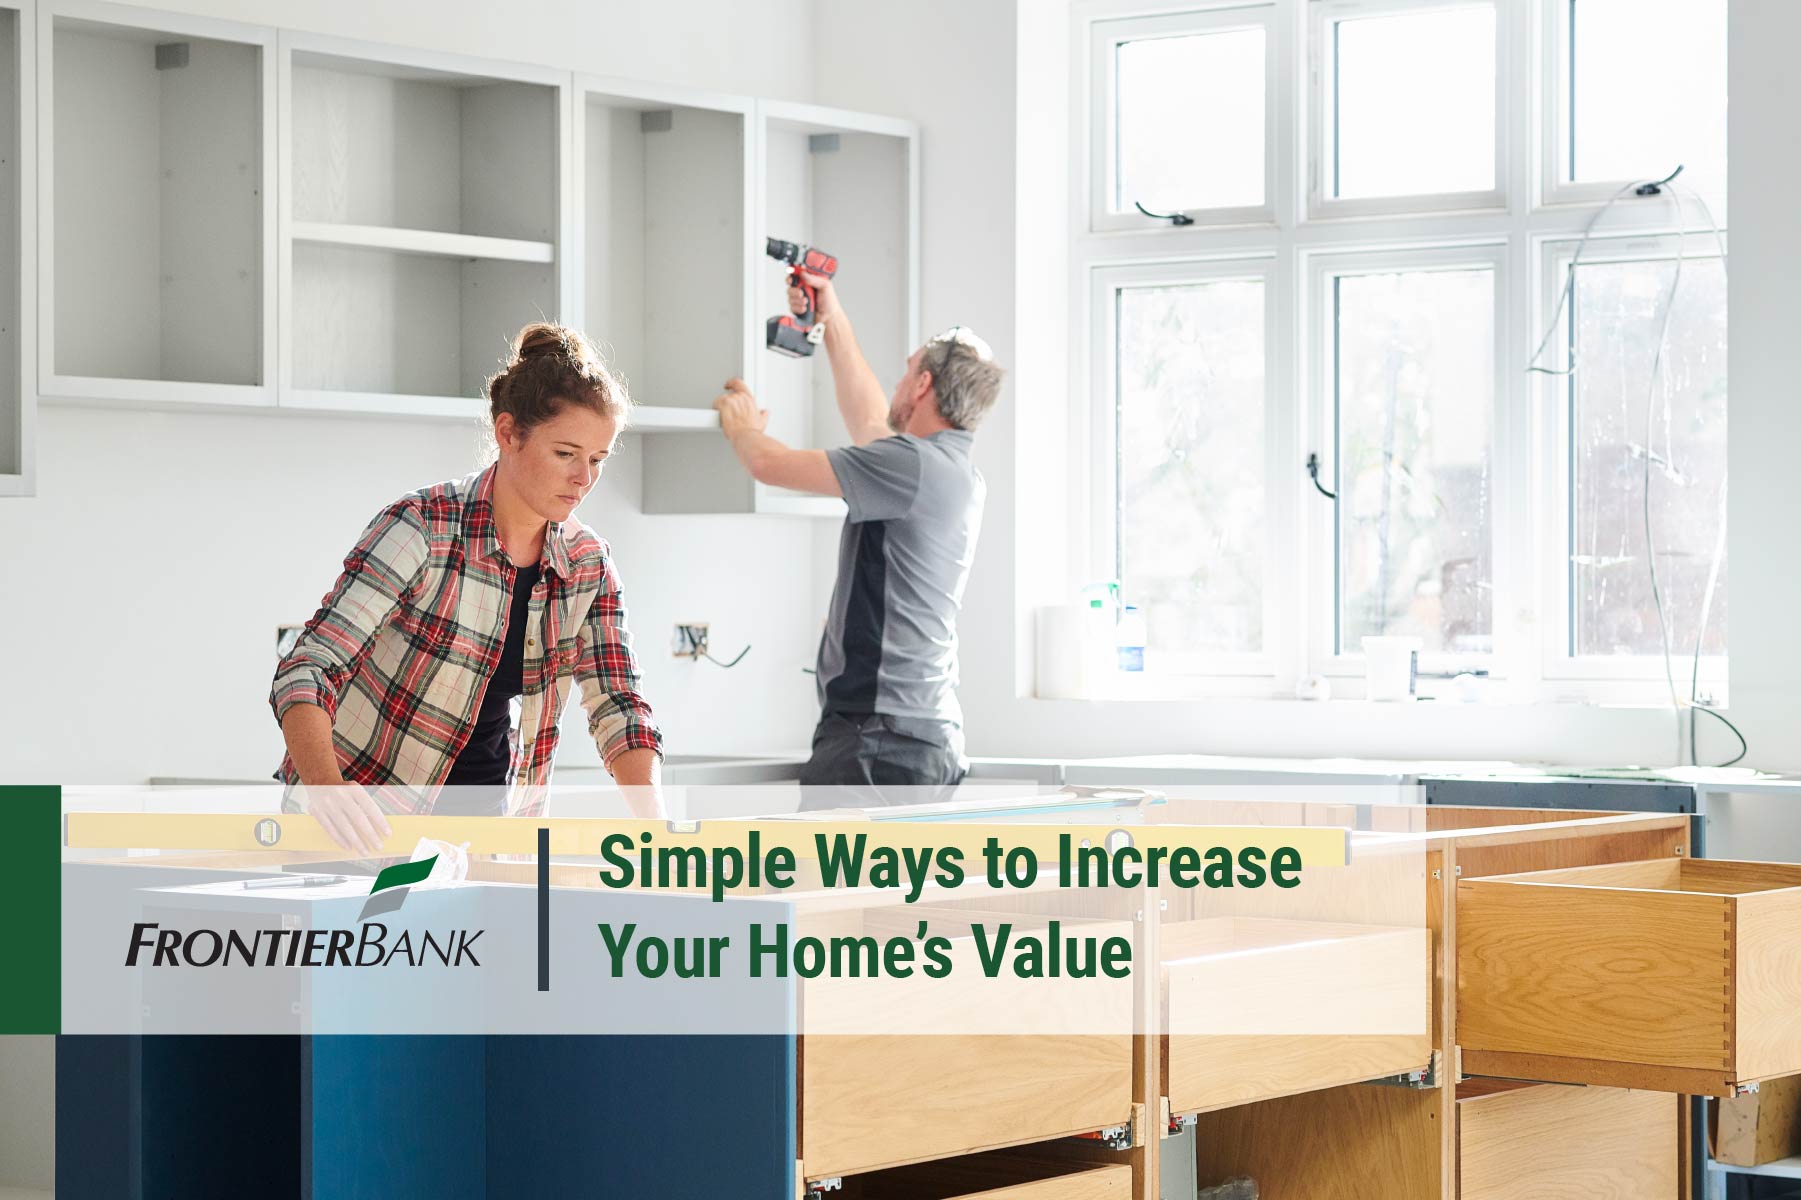 Simple Ways to Increase Your Home's Value with text